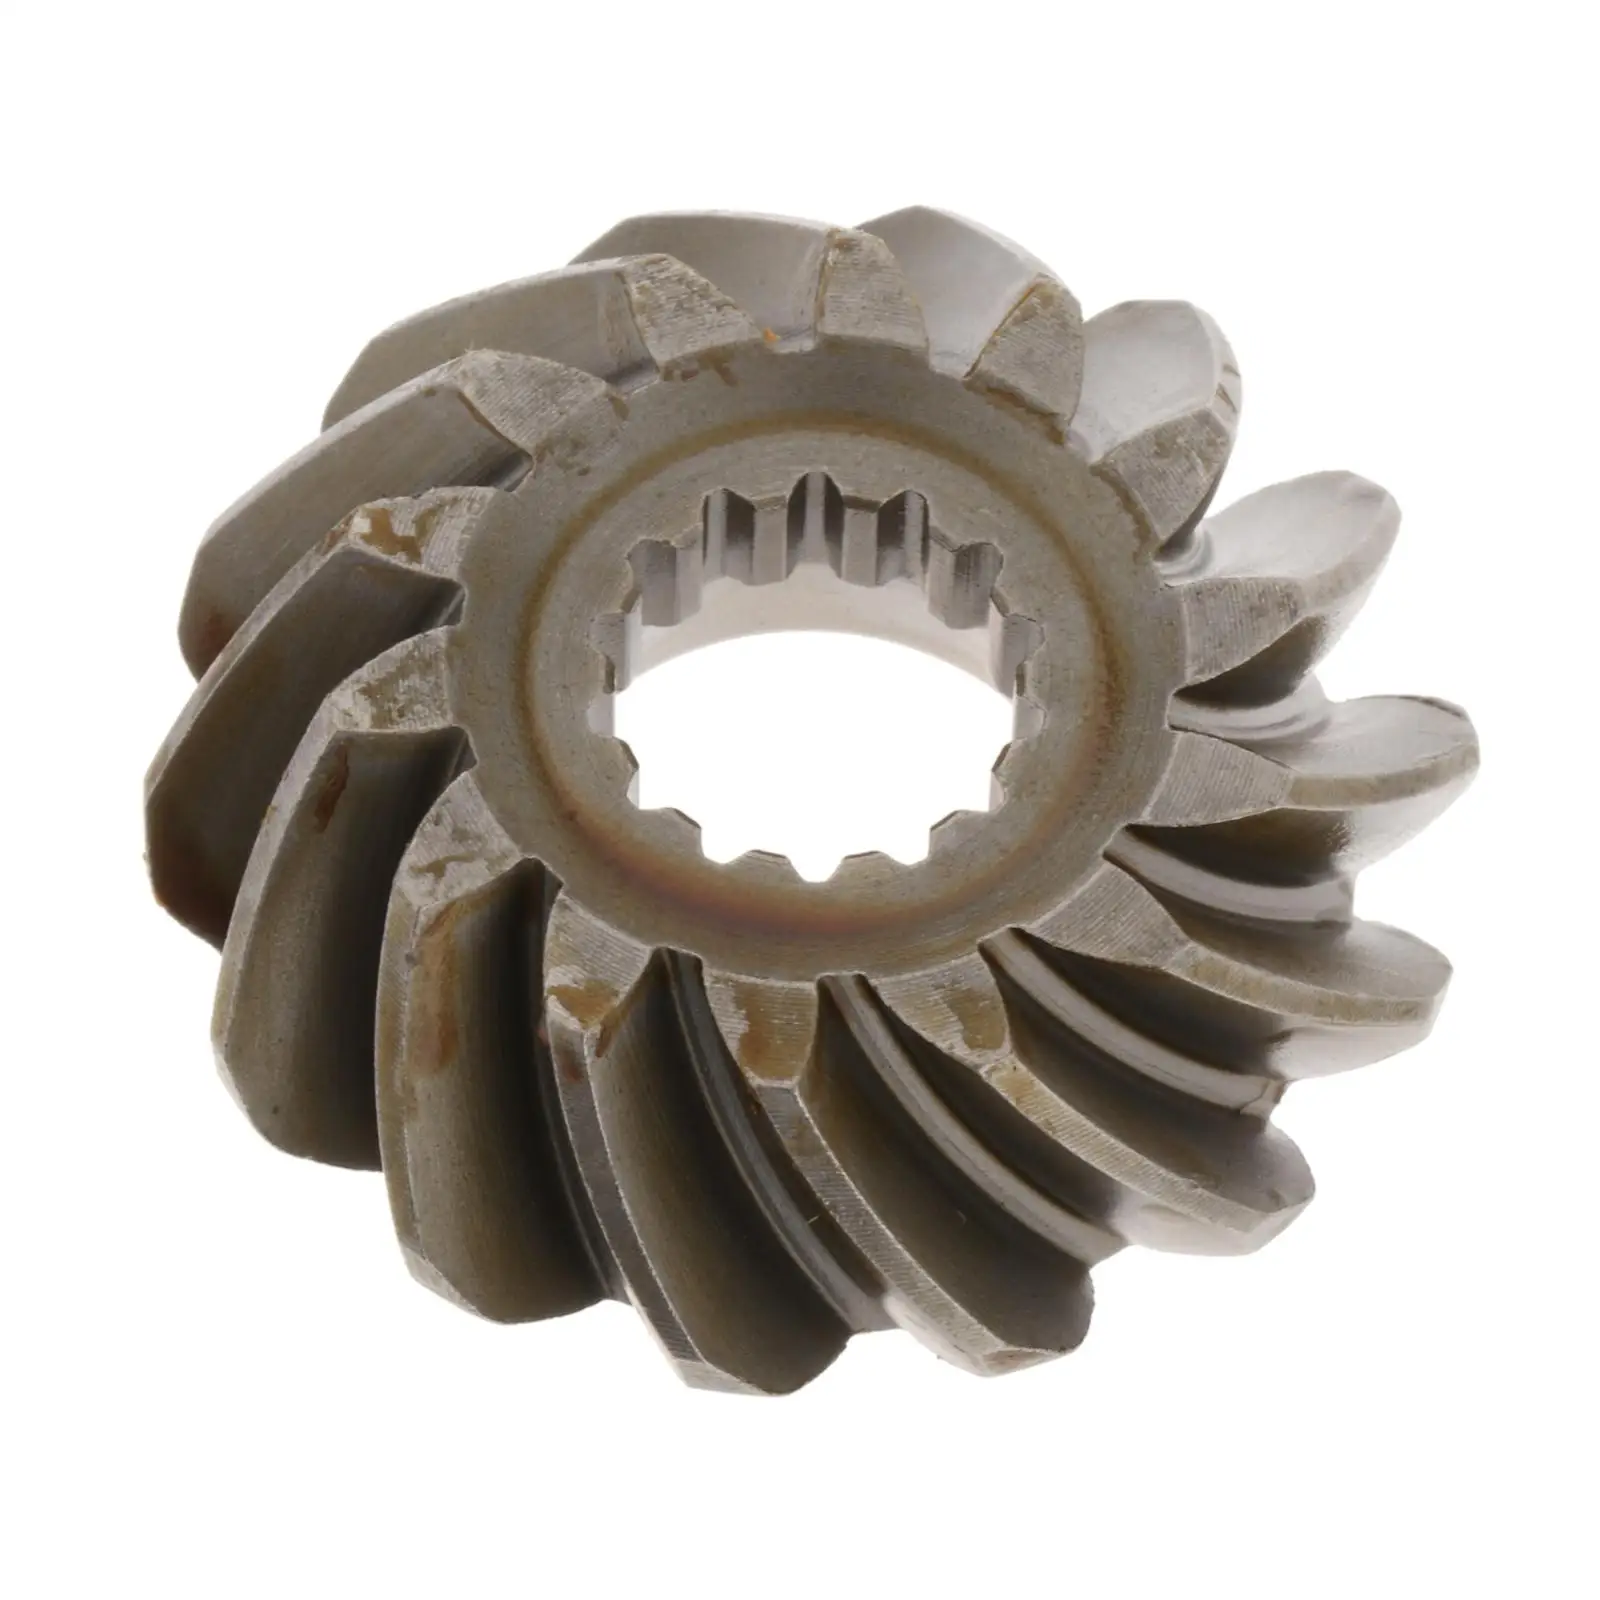 Boat Pinion Gear 43-813694T for Mercury Outboard Motor High quality